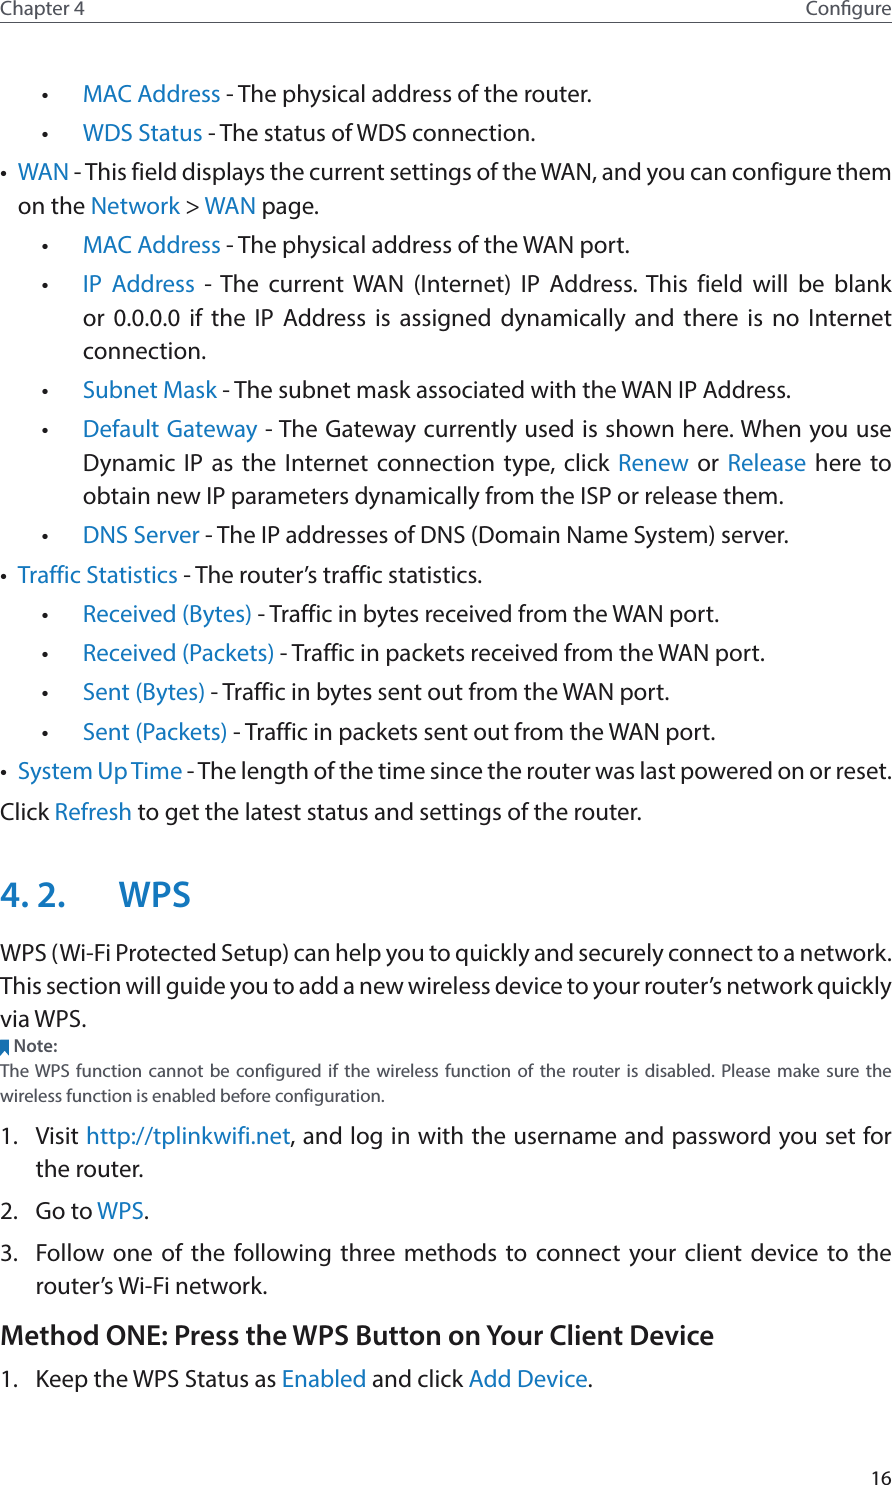 16Chapter 4 Congure•  MAC Address - The physical address of the router.•  WDS Status - The status of WDS connection.•  WAN - This field displays the current settings of the WAN, and you can configure them on the Network &gt; WAN page.•  MAC Address - The physical address of the WAN port.•  IP Address - The current WAN (Internet) IP Address. This field will be blank or 0.0.0.0 if the IP Address is assigned dynamically and there is no Internet connection.•  Subnet Mask - The subnet mask associated with the WAN IP Address.•  Default Gateway - The Gateway currently used is shown here. When you use Dynamic IP as the Internet connection type, click Renew or  Release here to obtain new IP parameters dynamically from the ISP or release them.•  DNS Server - The IP addresses of DNS (Domain Name System) server.•  Traffic Statistics - The router’s traffic statistics.•  Received (Bytes) - Traffic in bytes received from the WAN port.•  Received (Packets) - Traffic in packets received from the WAN port.•  Sent (Bytes) - Traffic in bytes sent out from the WAN port.•  Sent (Packets) - Traffic in packets sent out from the WAN port.•  System Up Time - The length of the time since the router was last powered on or reset.Click Refresh to get the latest status and settings of the router.4. 2.  WPSWPS (Wi-Fi Protected Setup) can help you to quickly and securely connect to a network. This section will guide you to add a new wireless device to your router’s network quickly via WPS.Note:The WPS function cannot be configured if the wireless function of the router is disabled. Please make sure the wireless function is enabled before configuration.1.  Visit http://tplinkwifi.net, and log in with the username and password you set for the router.2.  Go to WPS. 3.  Follow one of the following three methods to connect your client device to the router’s Wi-Fi network.Method ONE: Press the WPS Button on Your Client Device1.  Keep the WPS Status as Enabled and click Add Device.